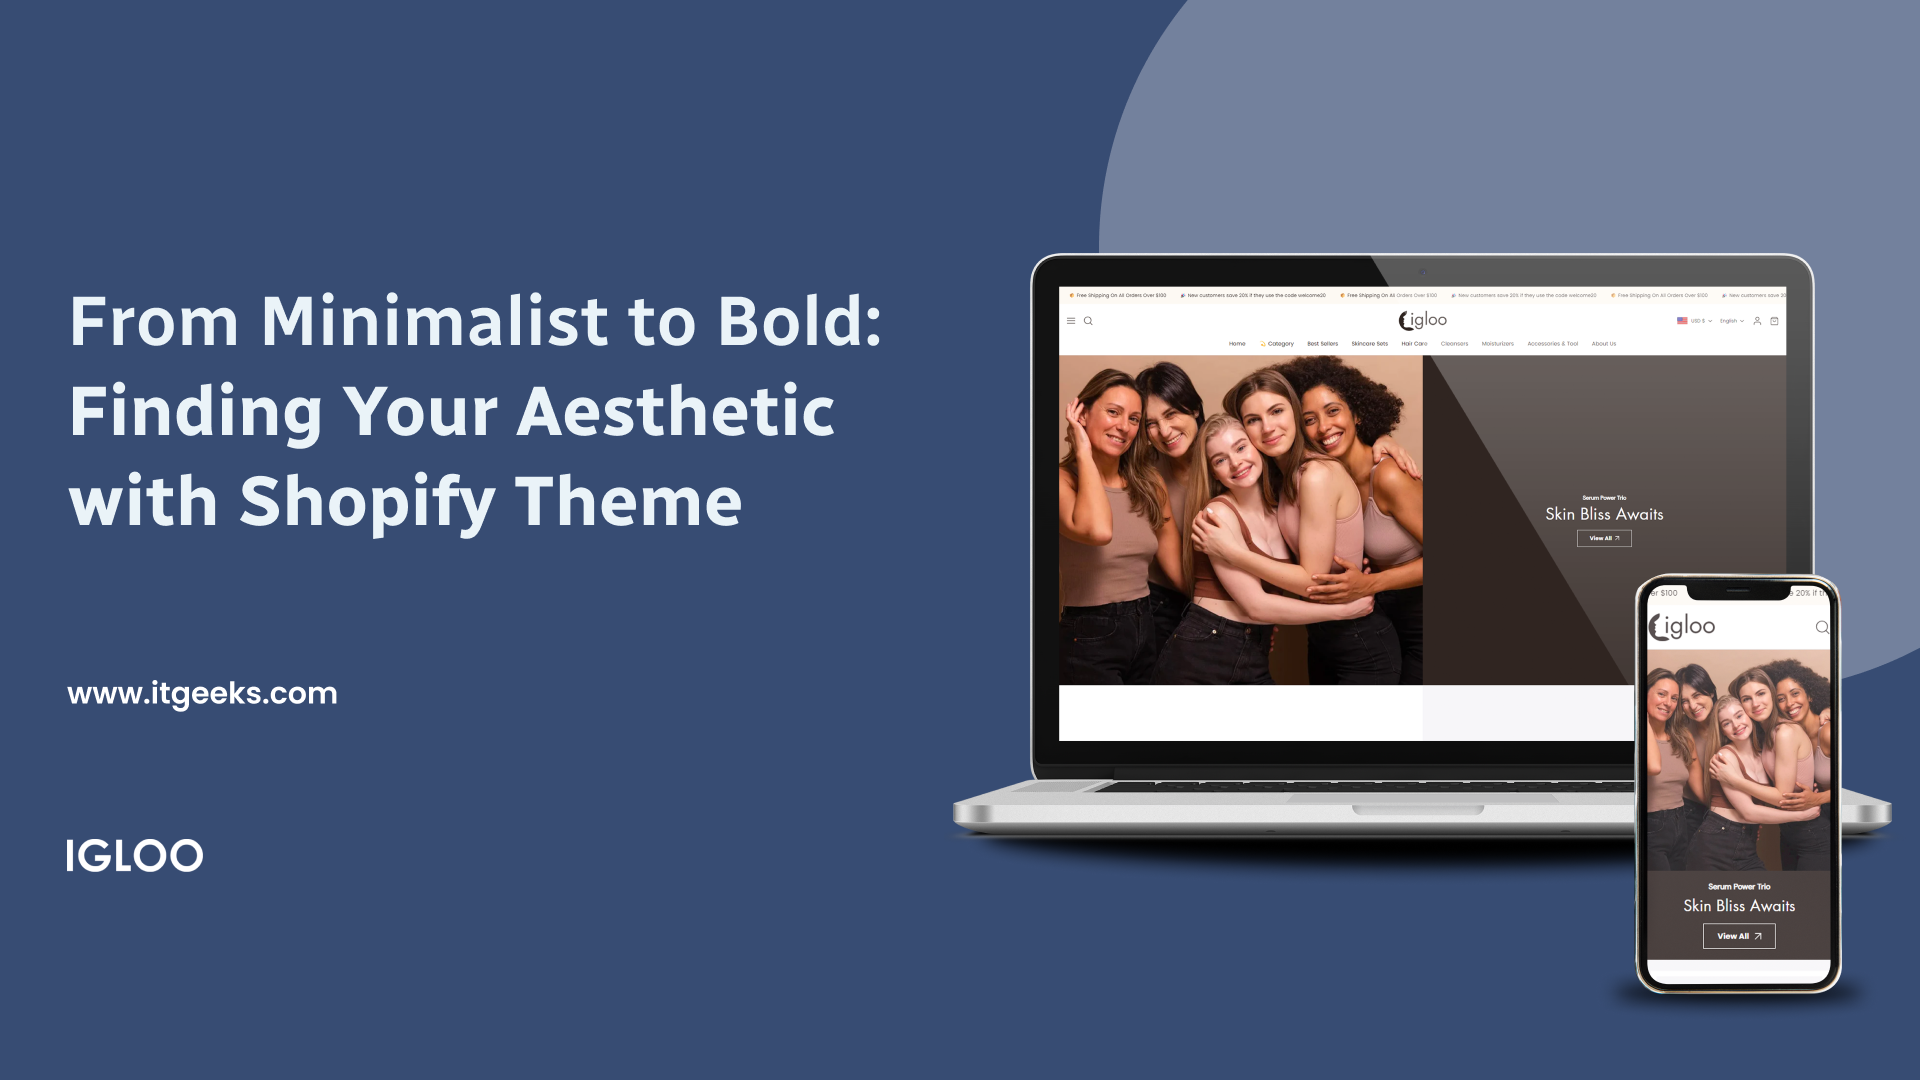 From Minimalist to Bold: Finding Your Aesthetic with Shopify Theme